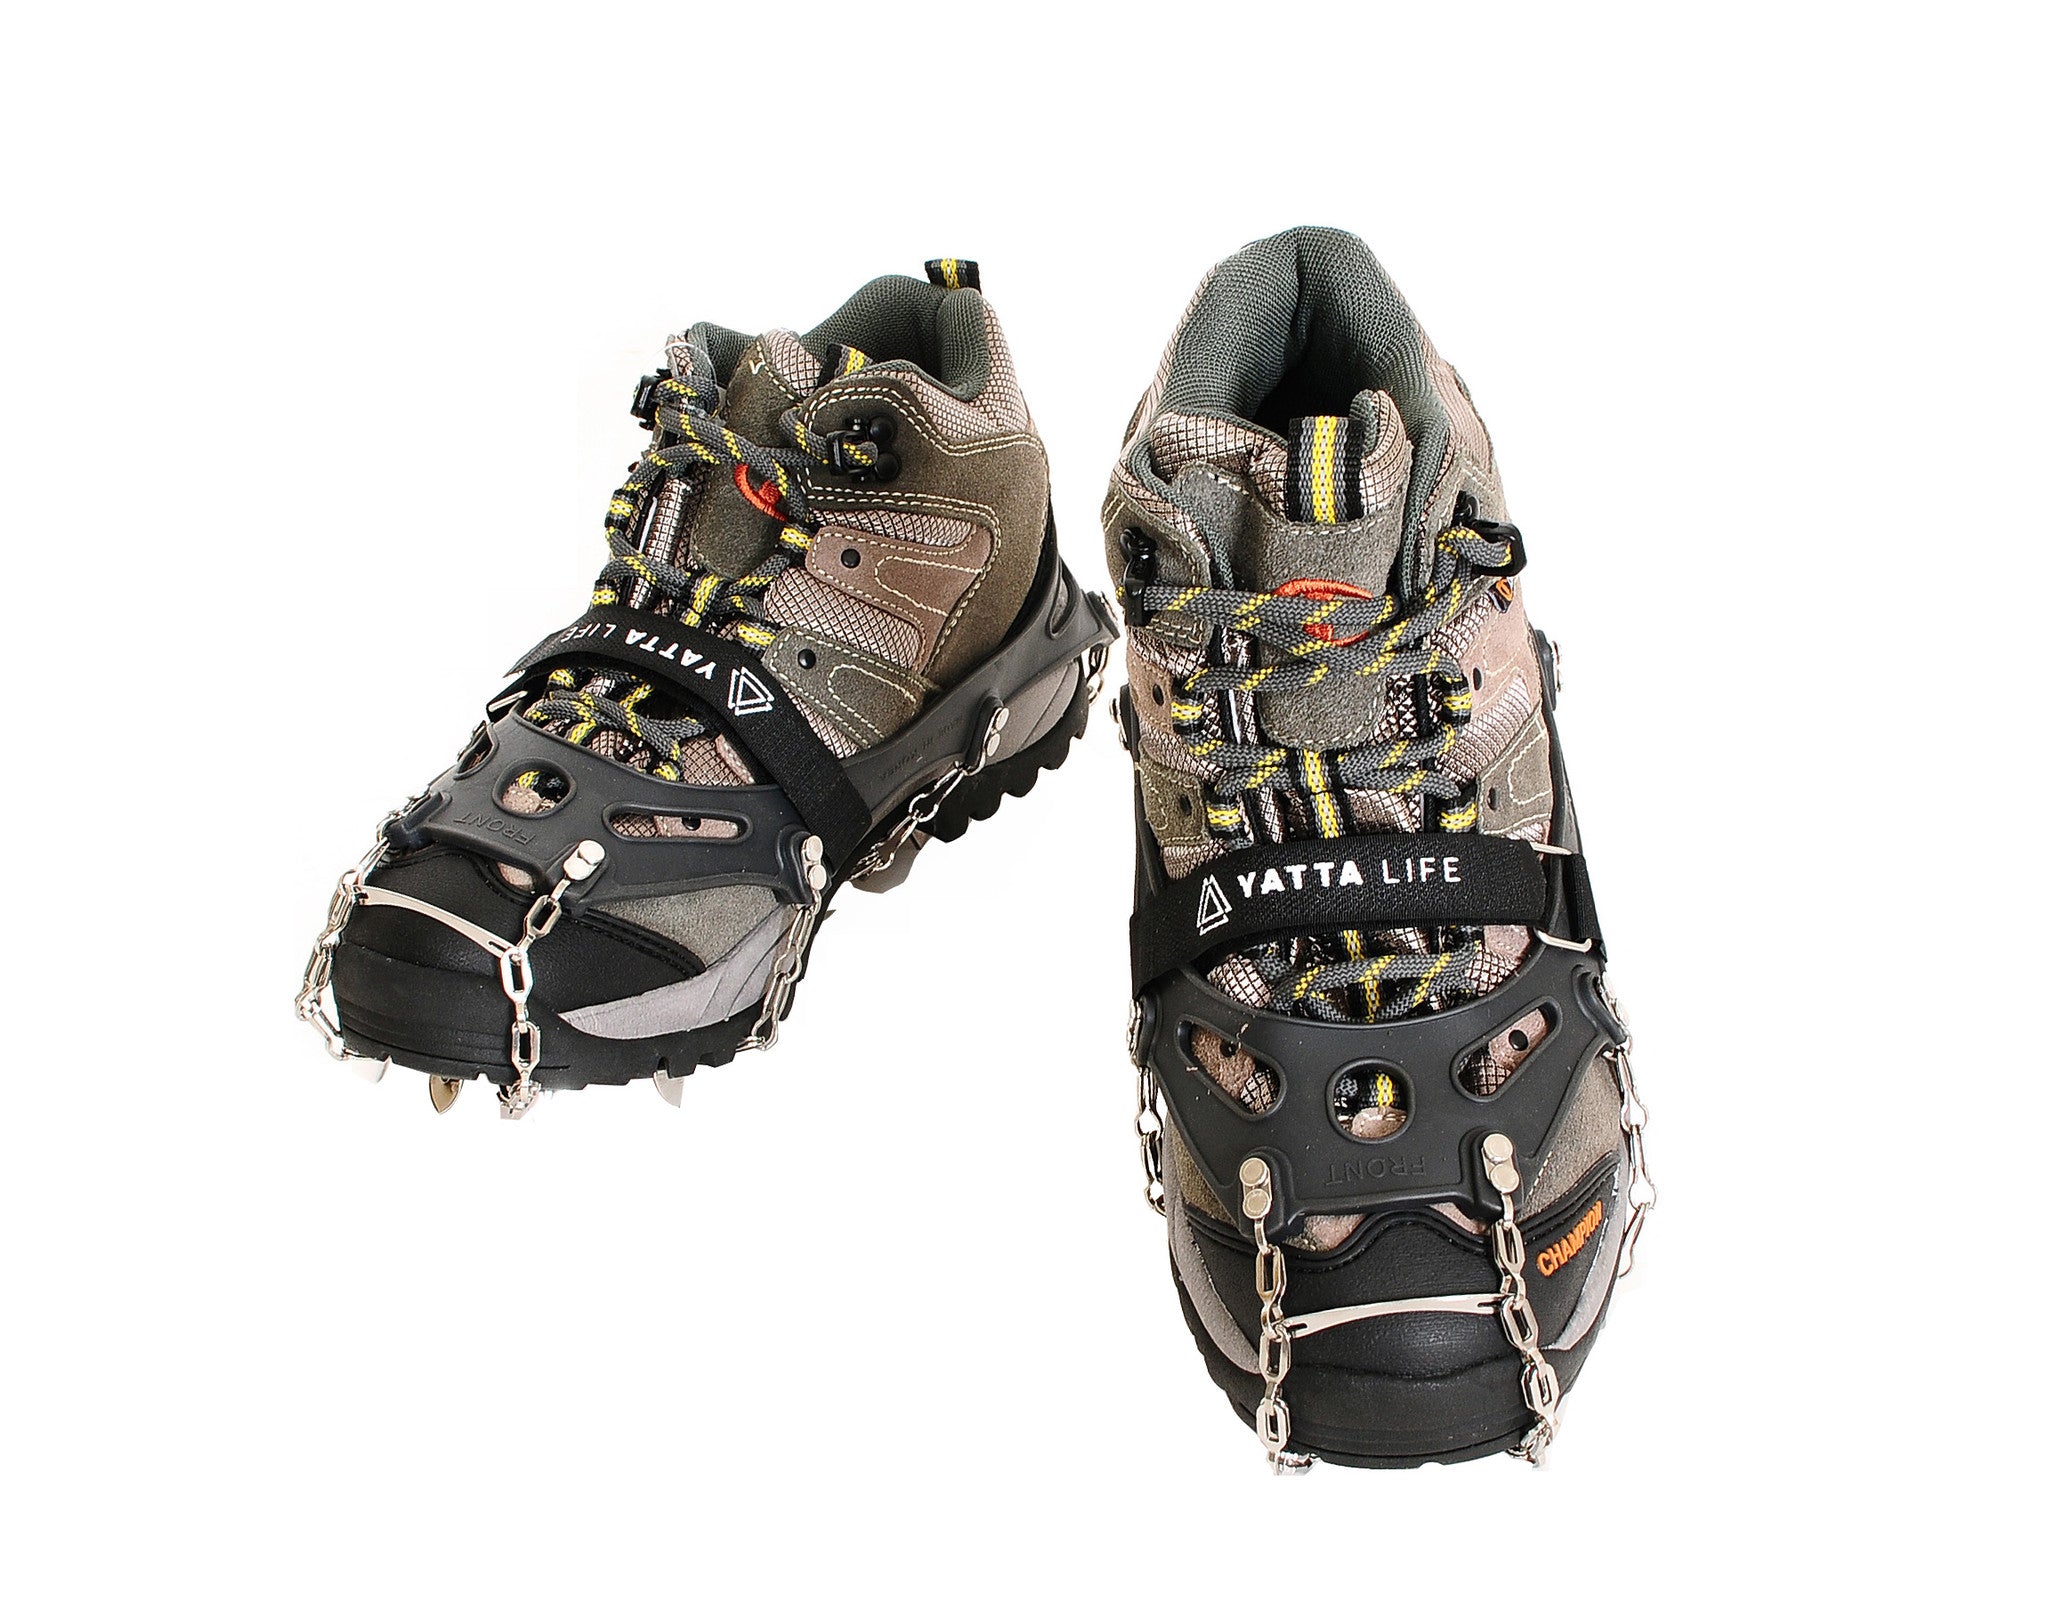 Winter Shoe Traction - What Makes Great Trail Spikes or Ice Spikes for –  Yatta Life Inc